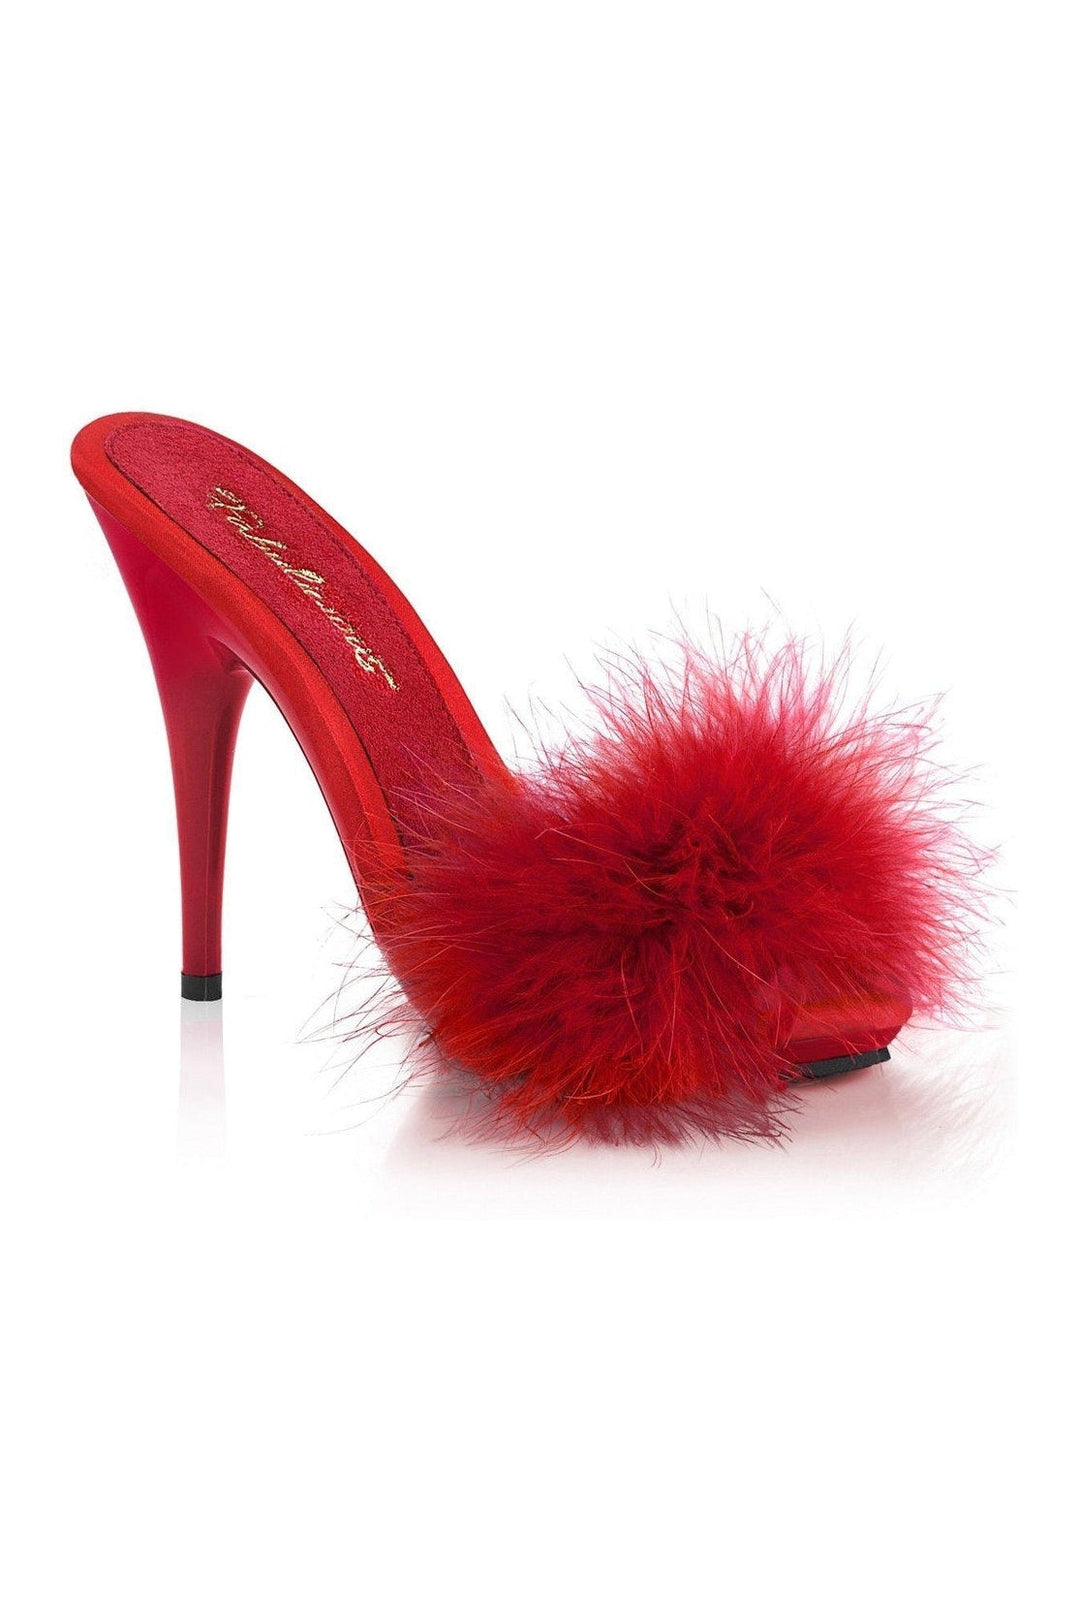 POISE-501F Slide | Red Marabou-Slides-Fabulicious-Red-9-Marabou-SEXYSHOES.COM